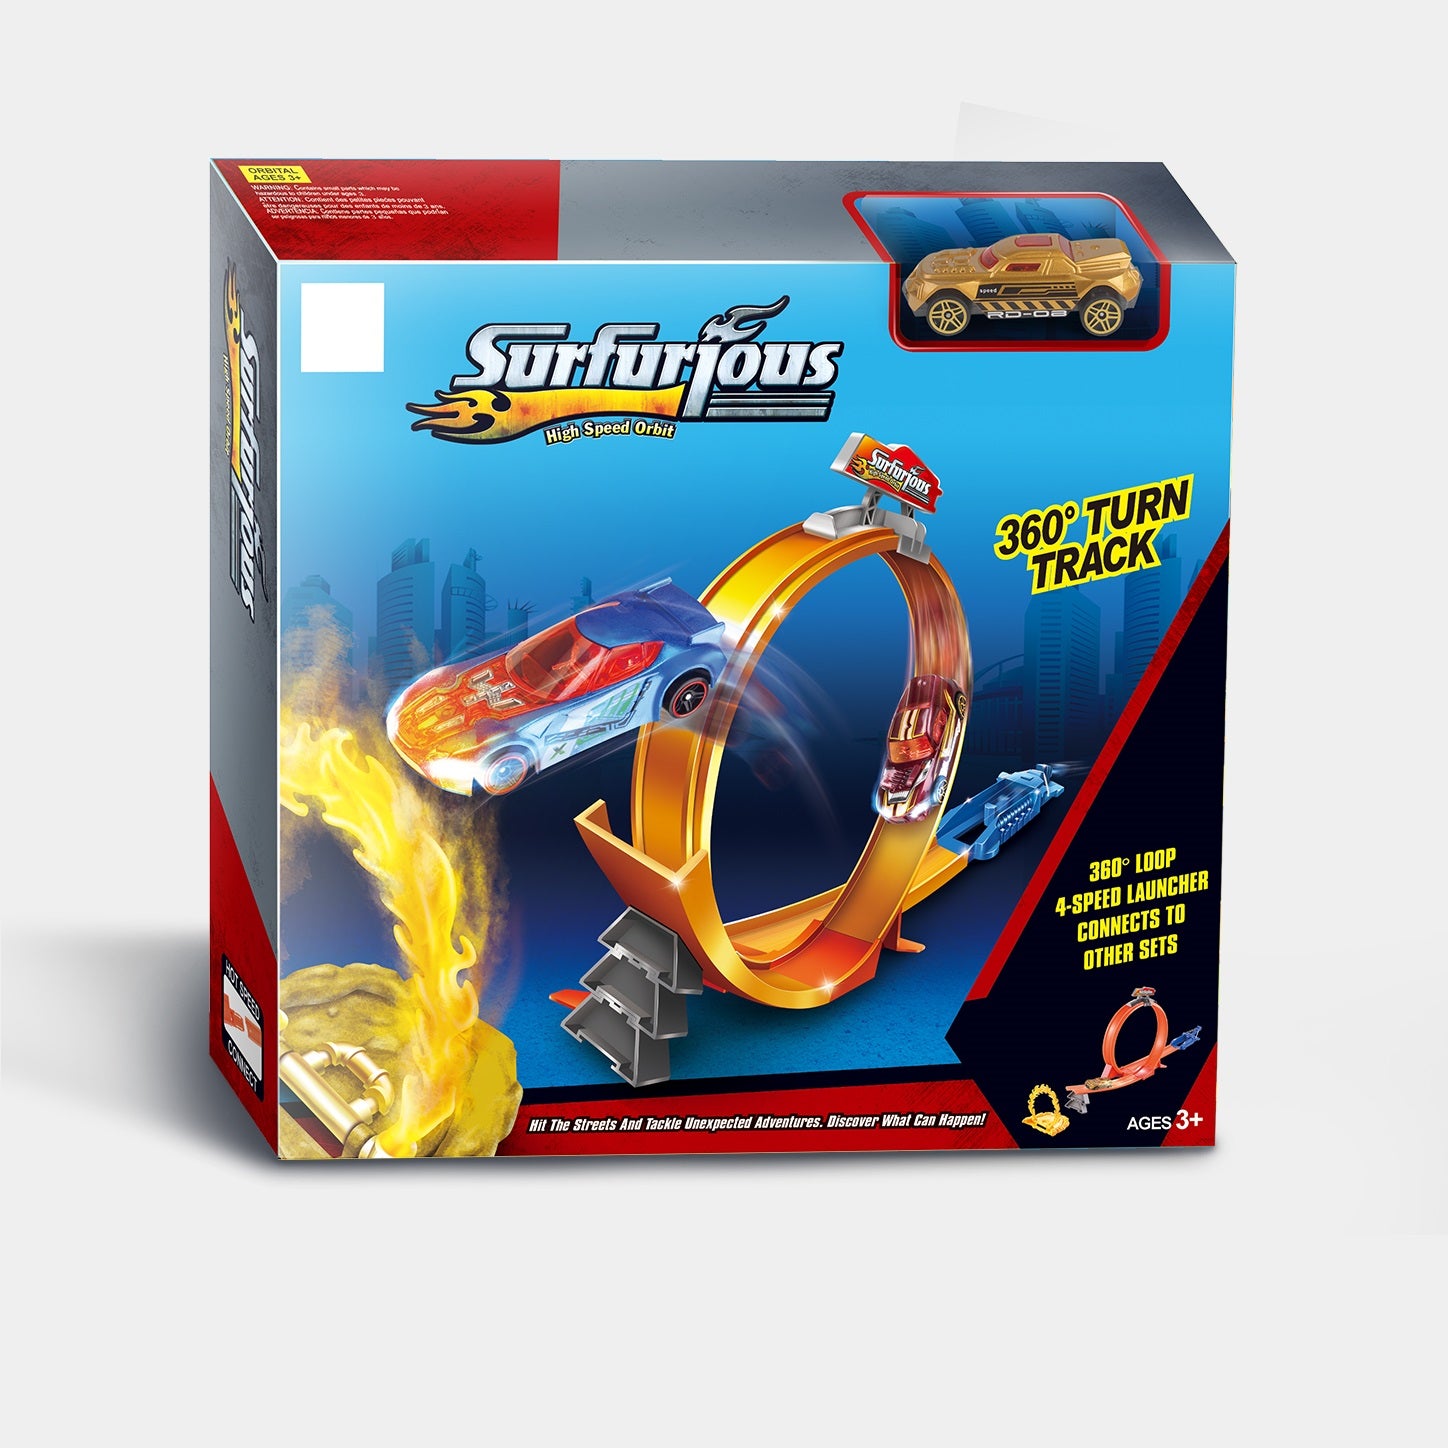 Surfurious Racing Track Play Set For Kids